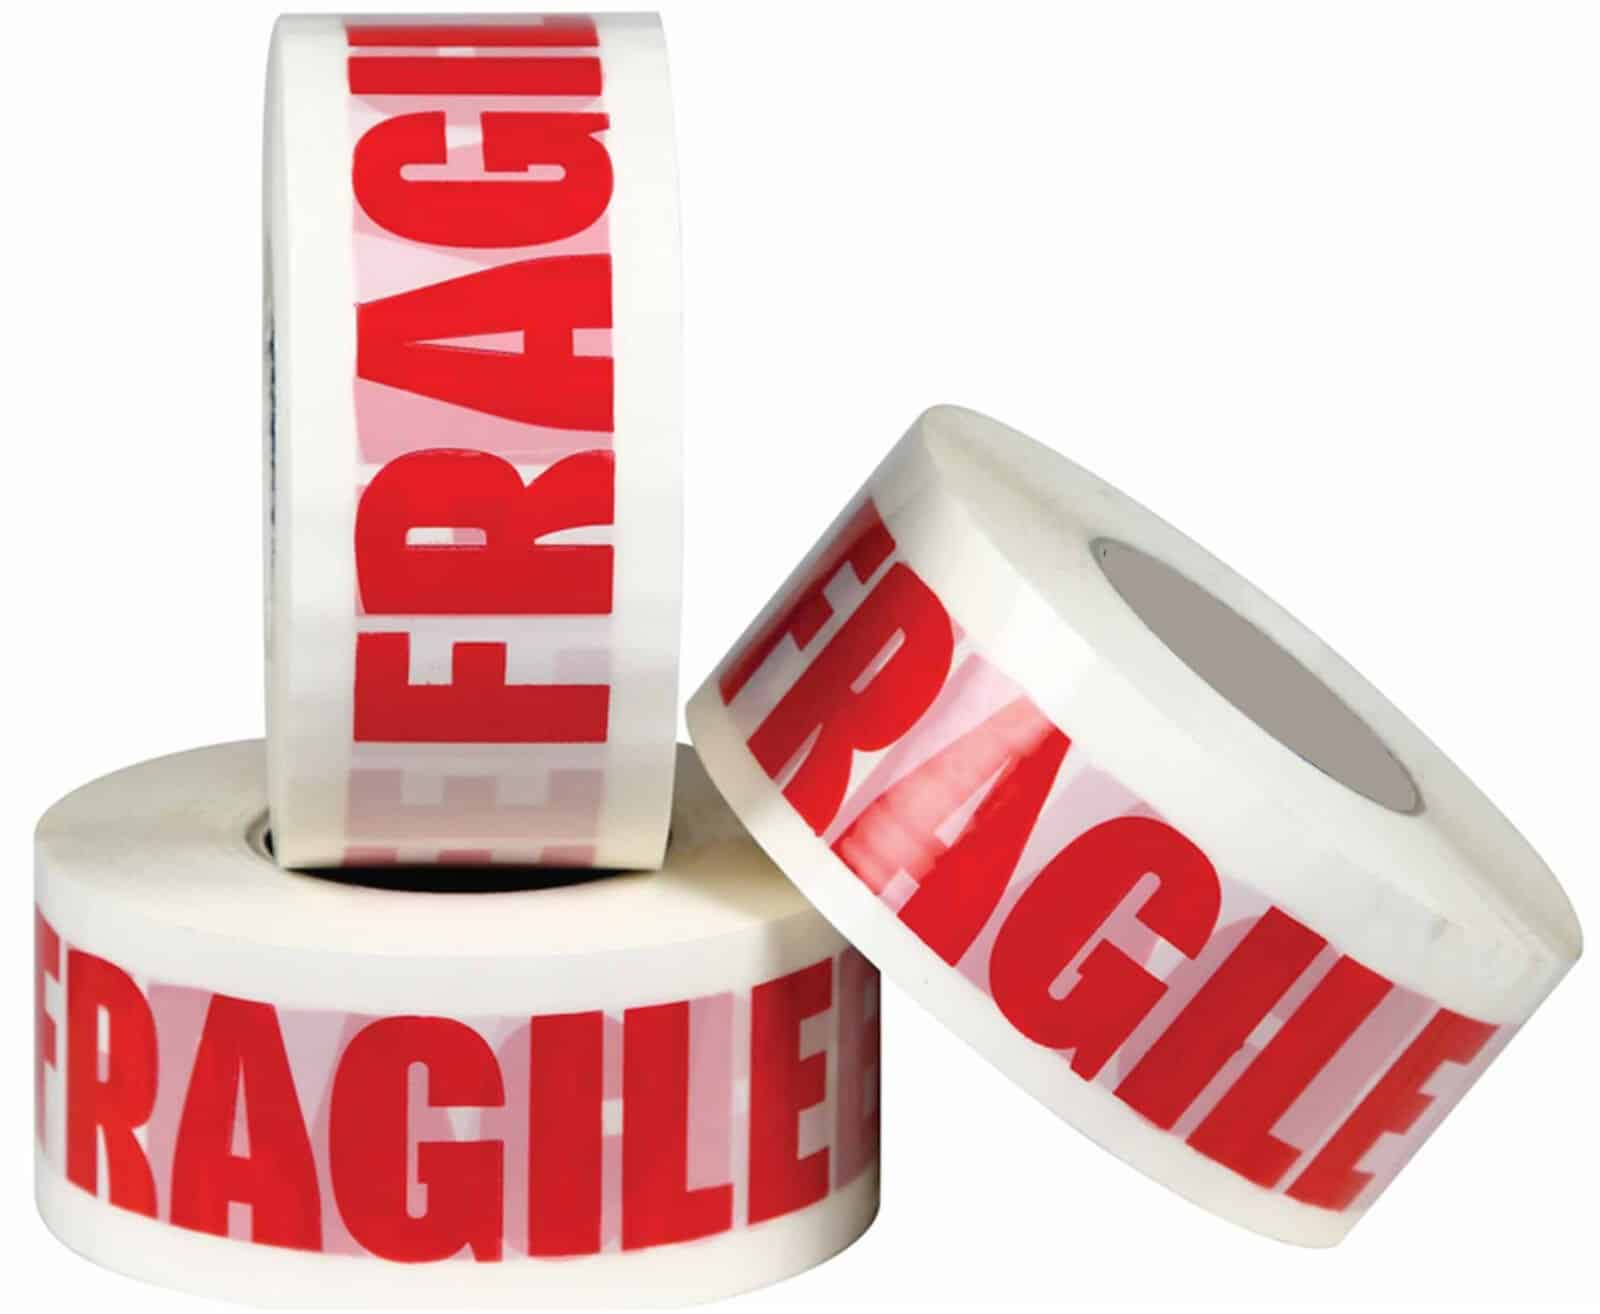 FRAGILE Printed Sealing Packing Parcel Tape Roll 48mm x 66m 